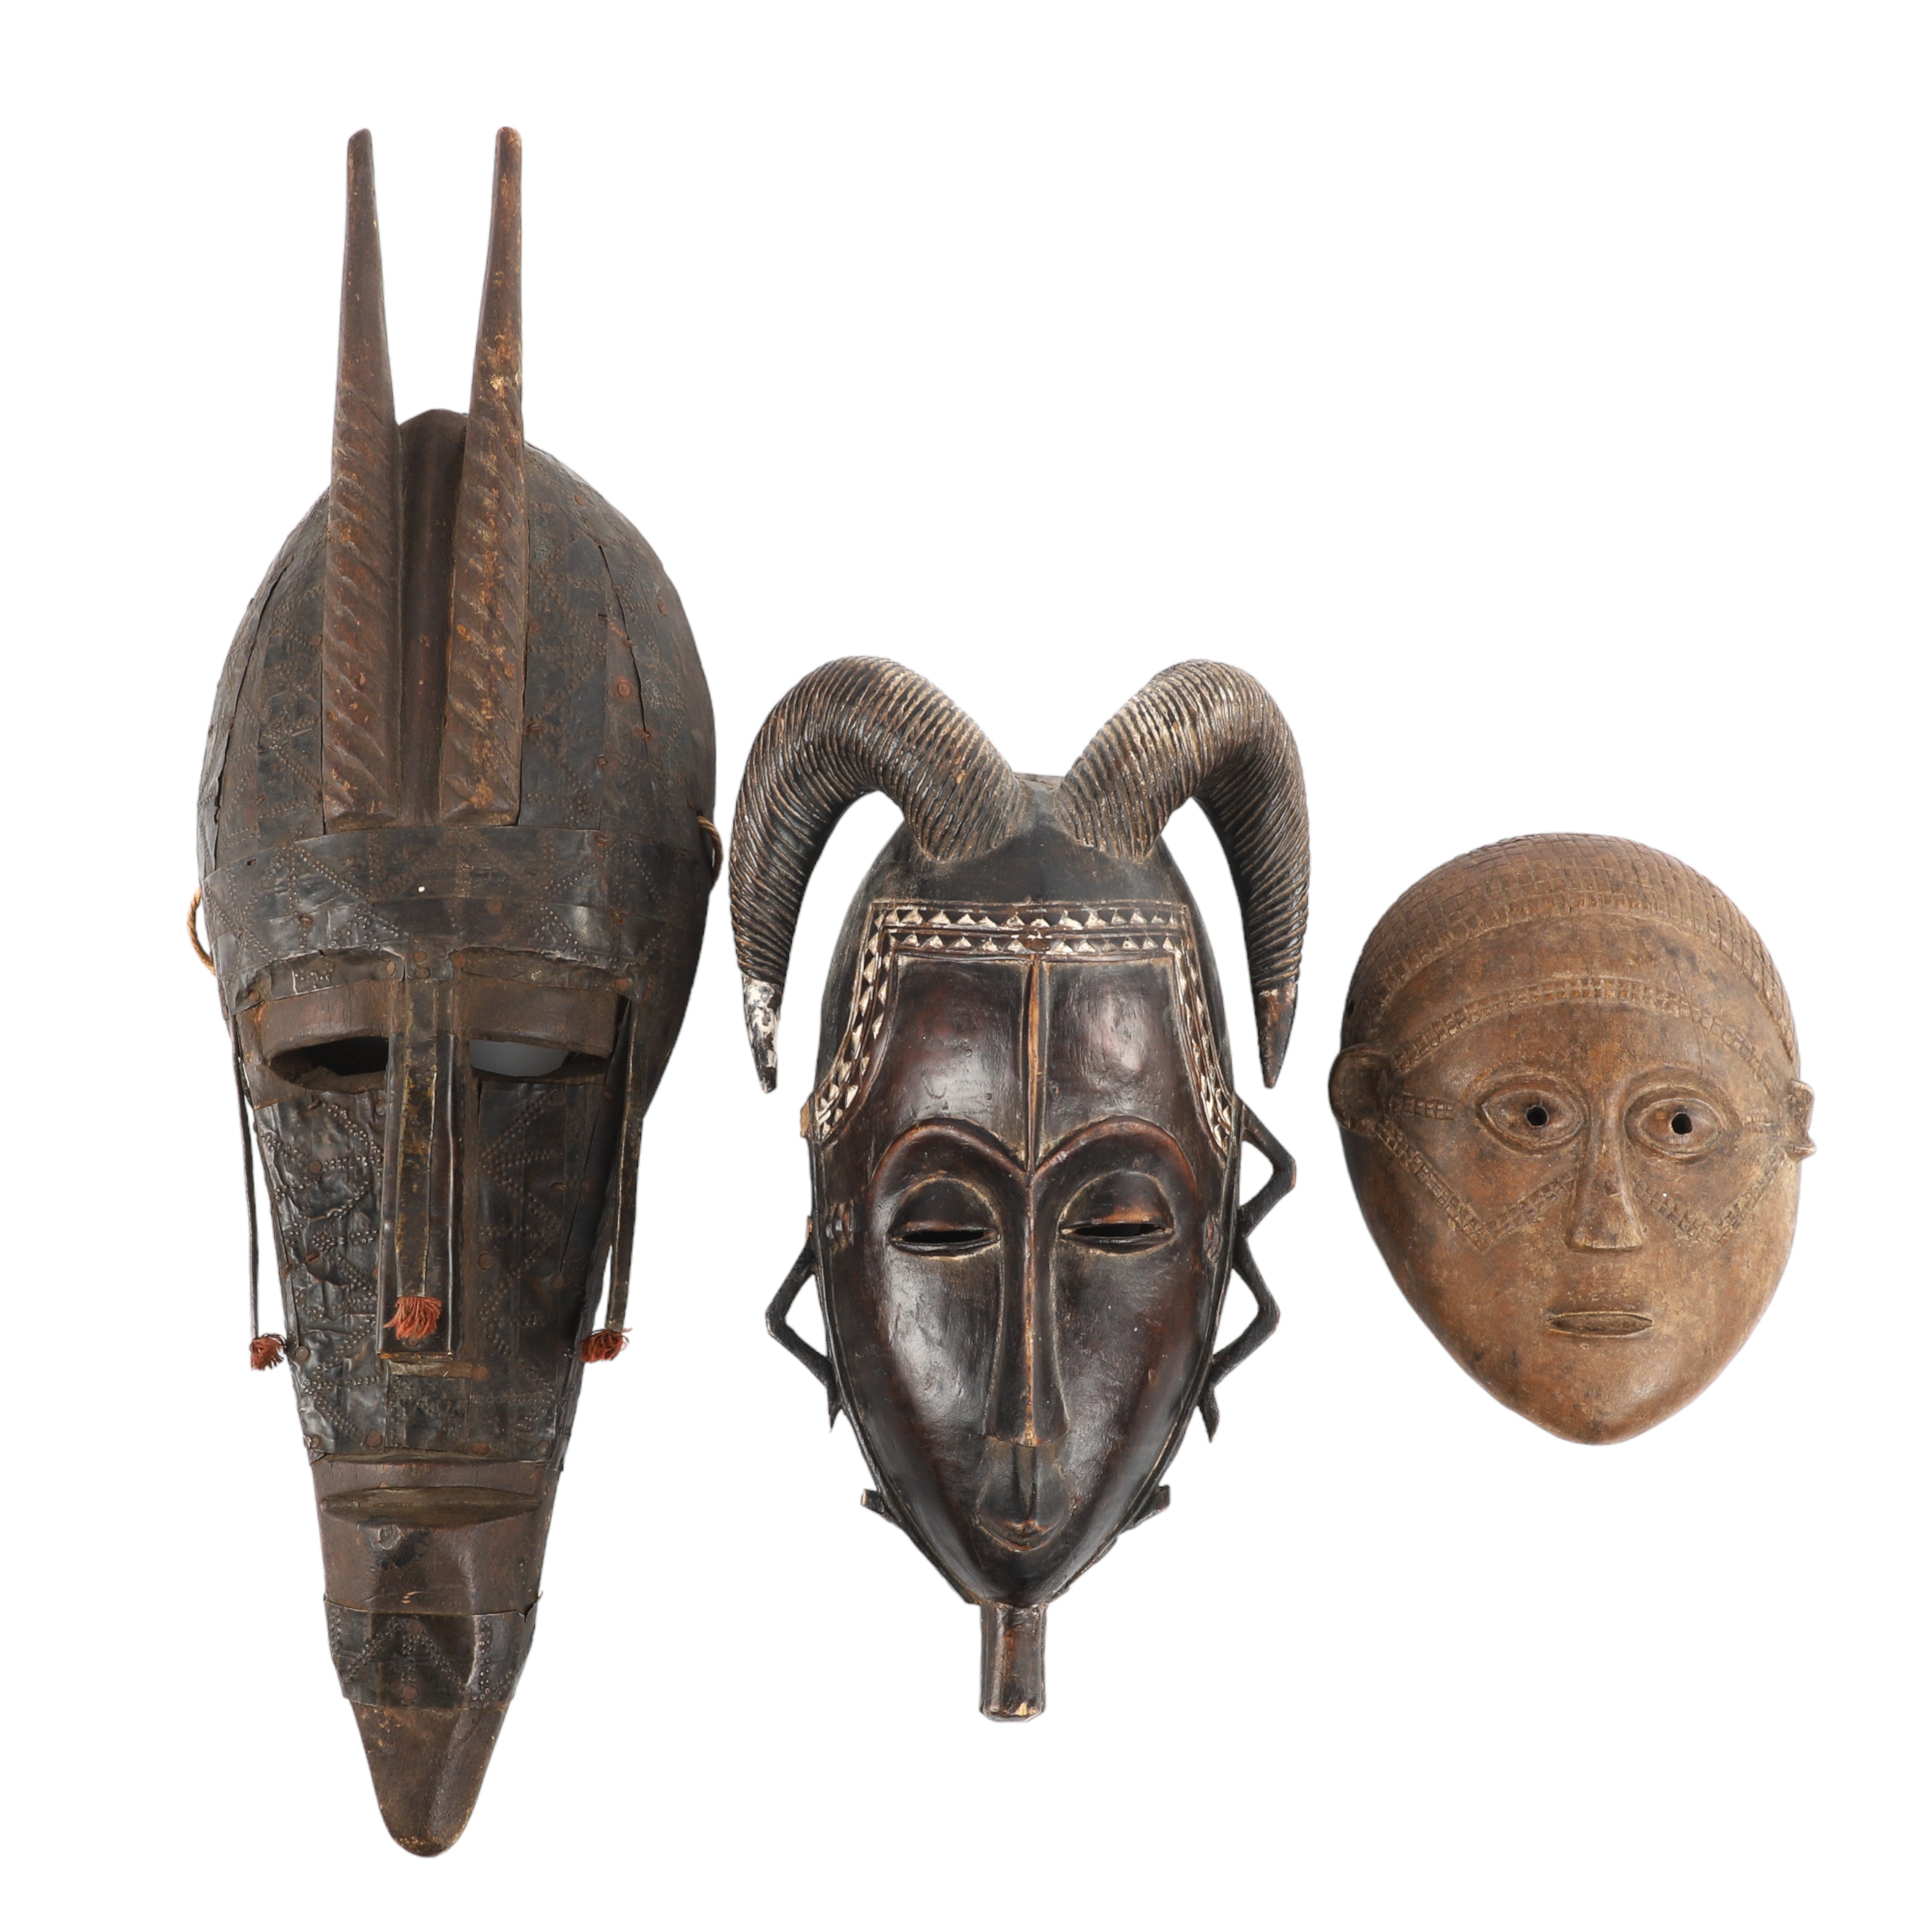  3 African carved wood tribal 3ca6ad